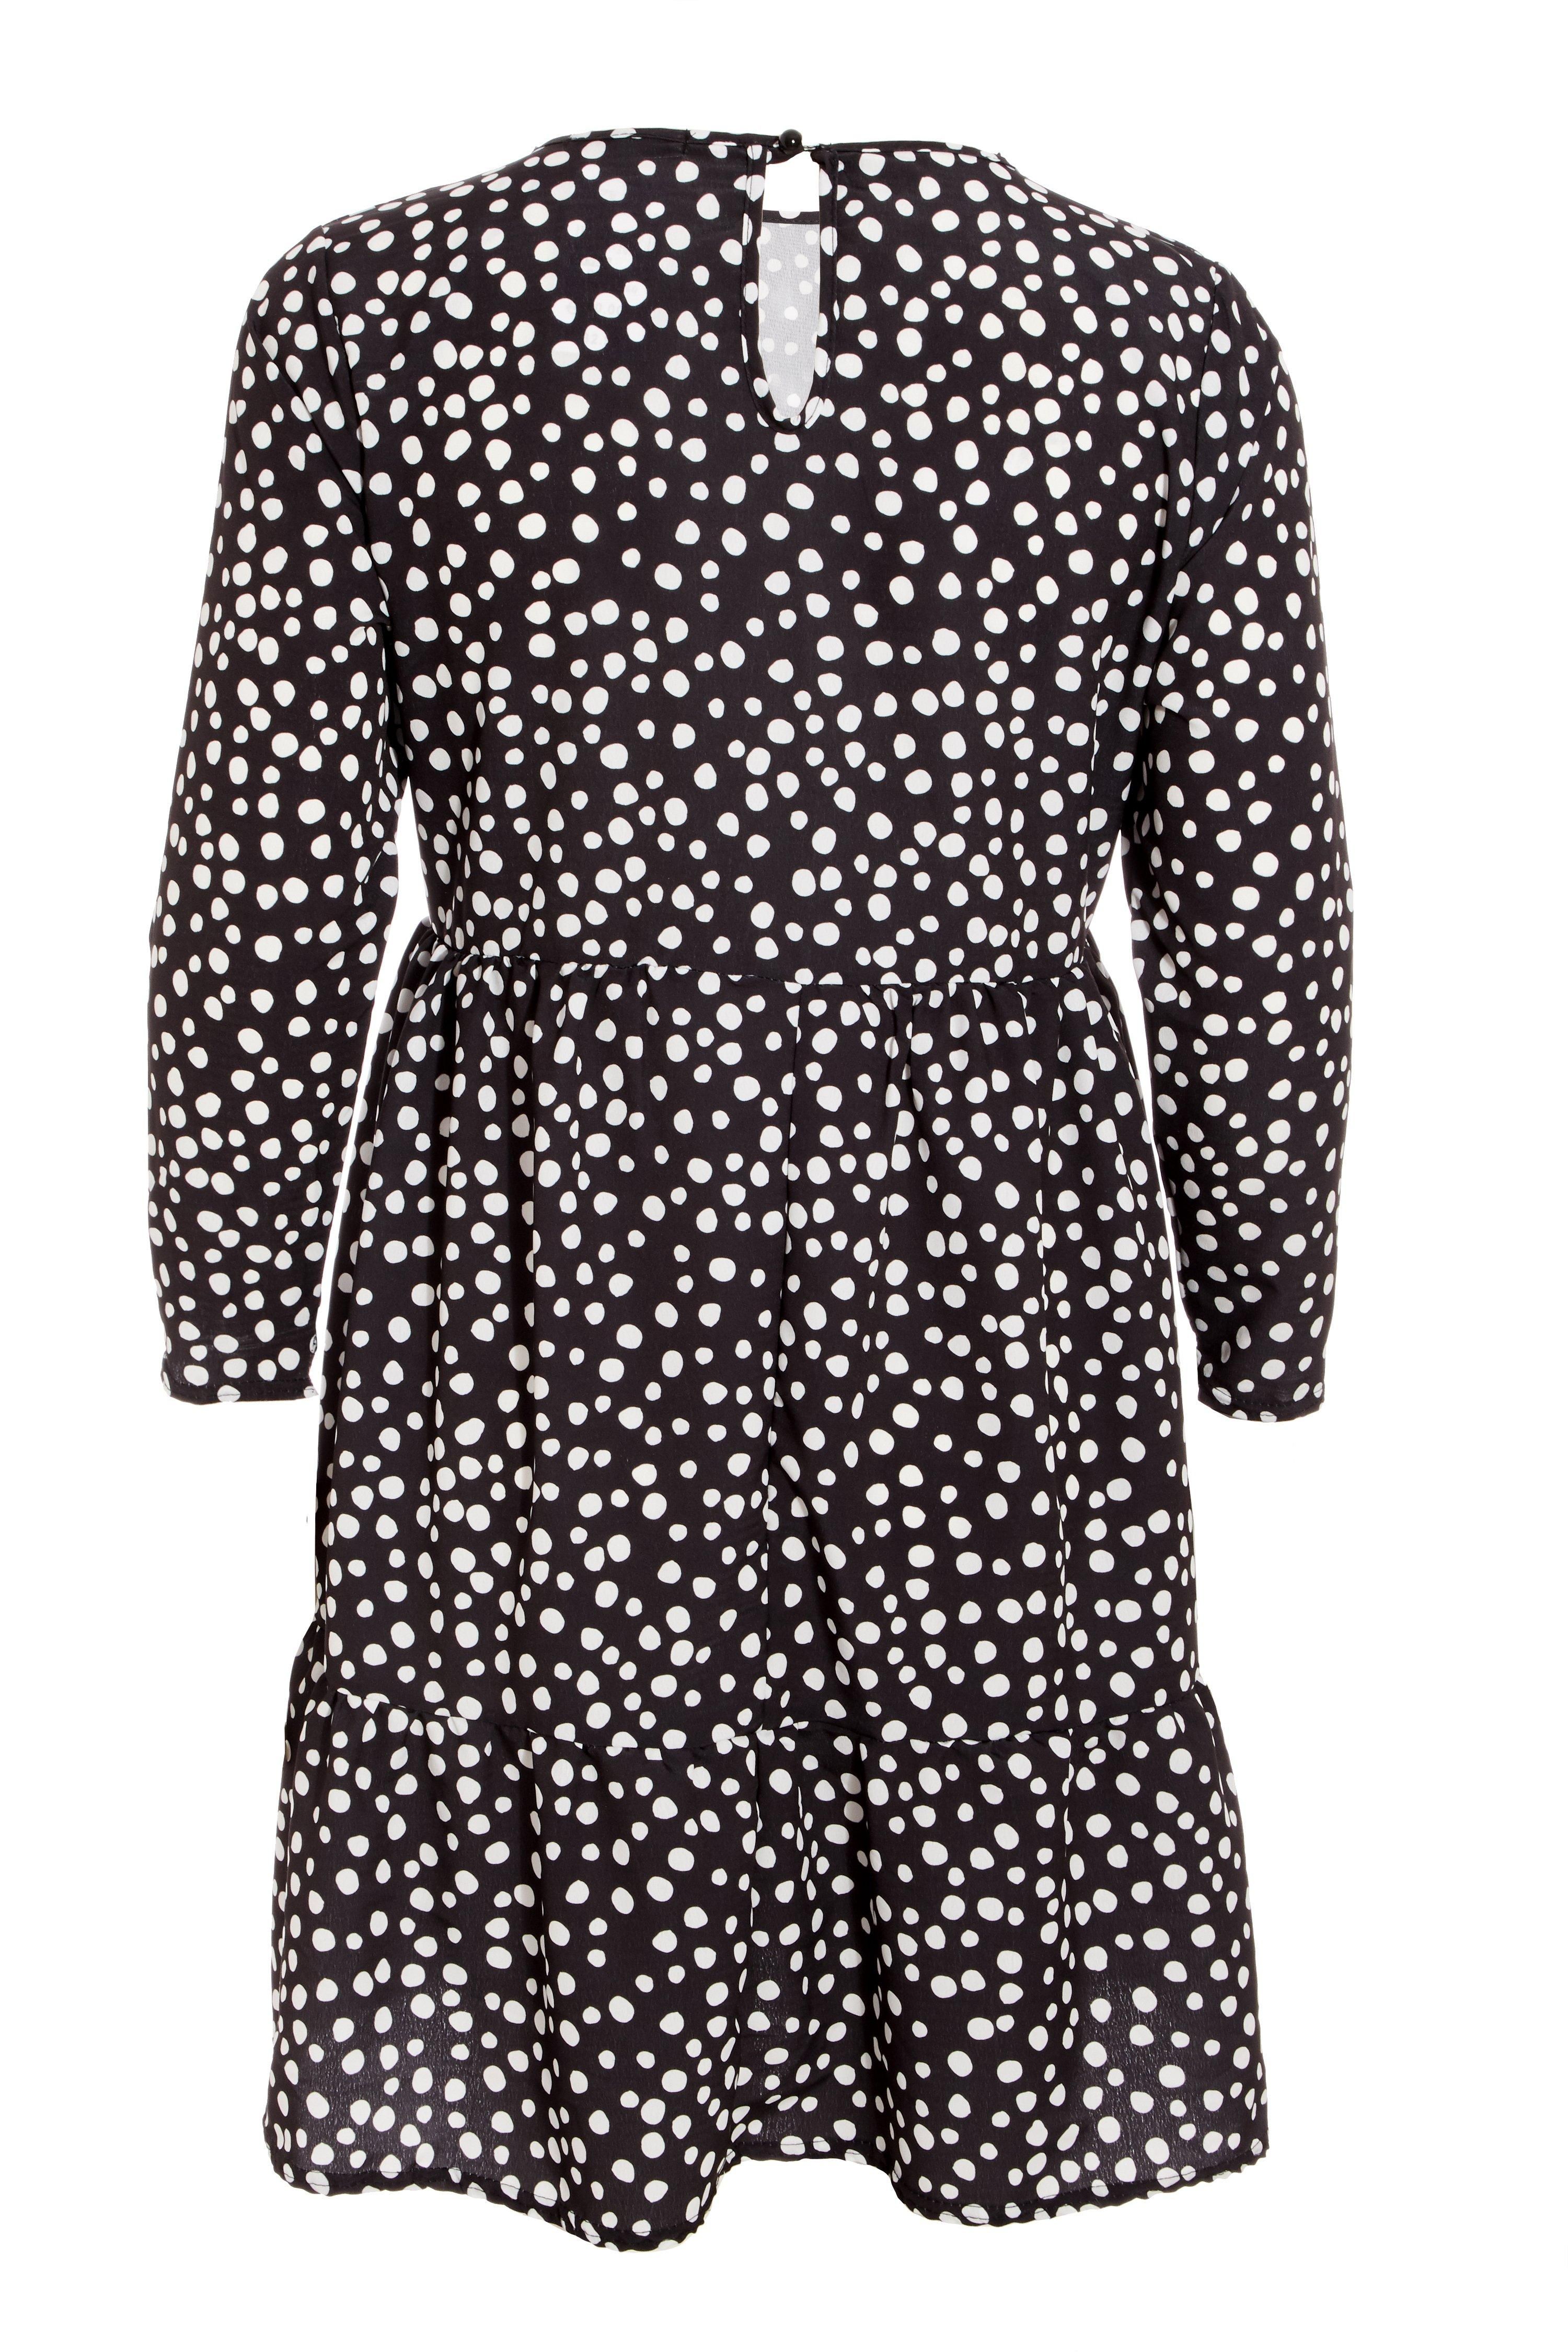 - Curve collection  - Polka dot print  - Tiered dress  - Smock style   - Length: 110cm approx  - Model Height: 5' 10